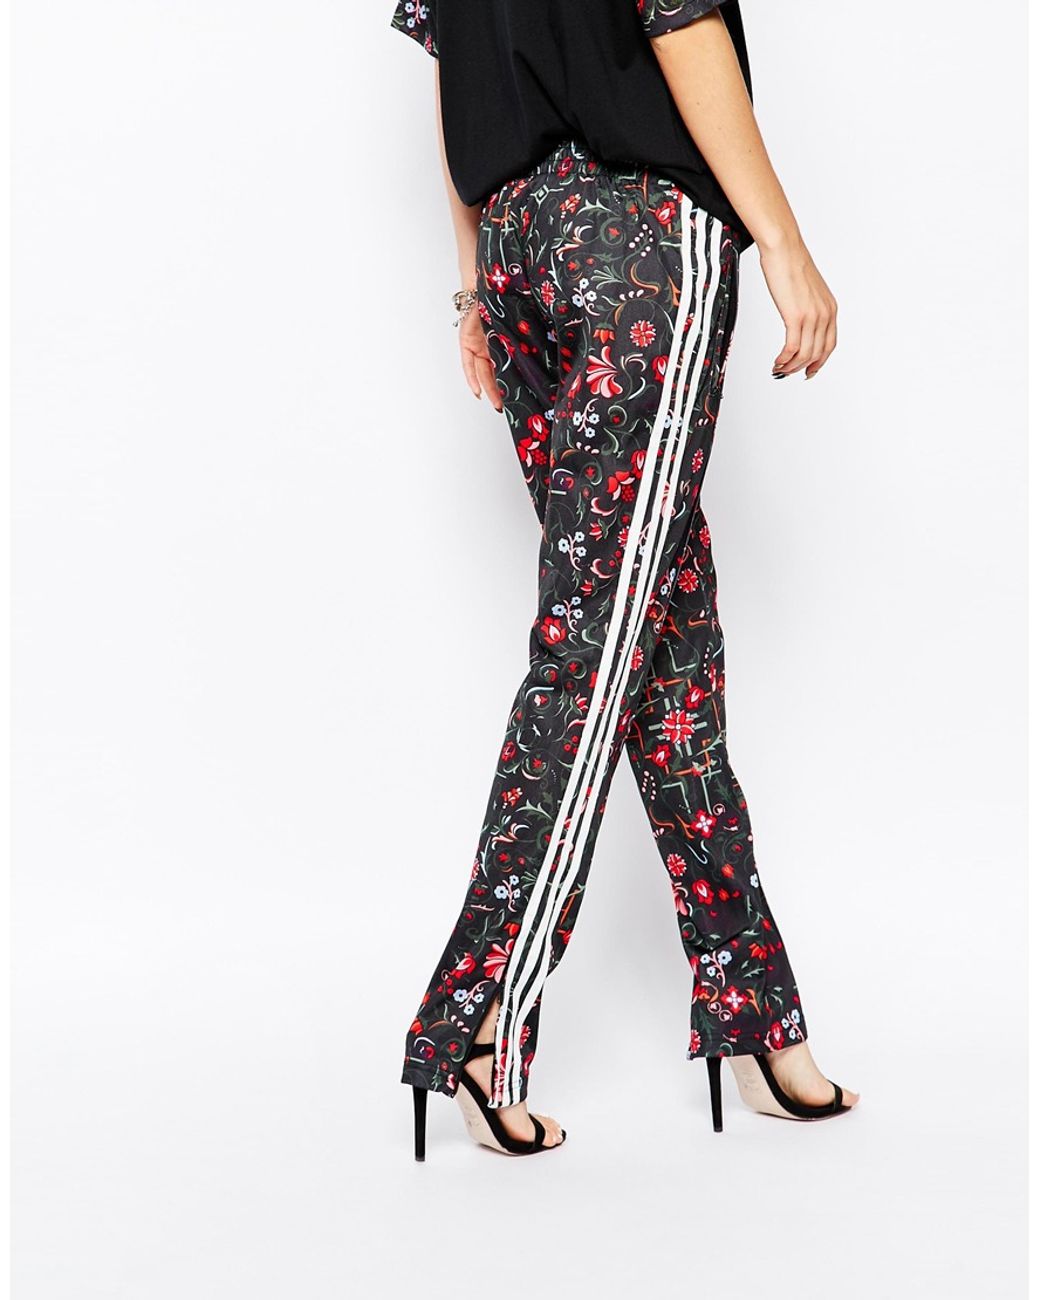 adidas Originals Moscow Floral Track Pants Lyst